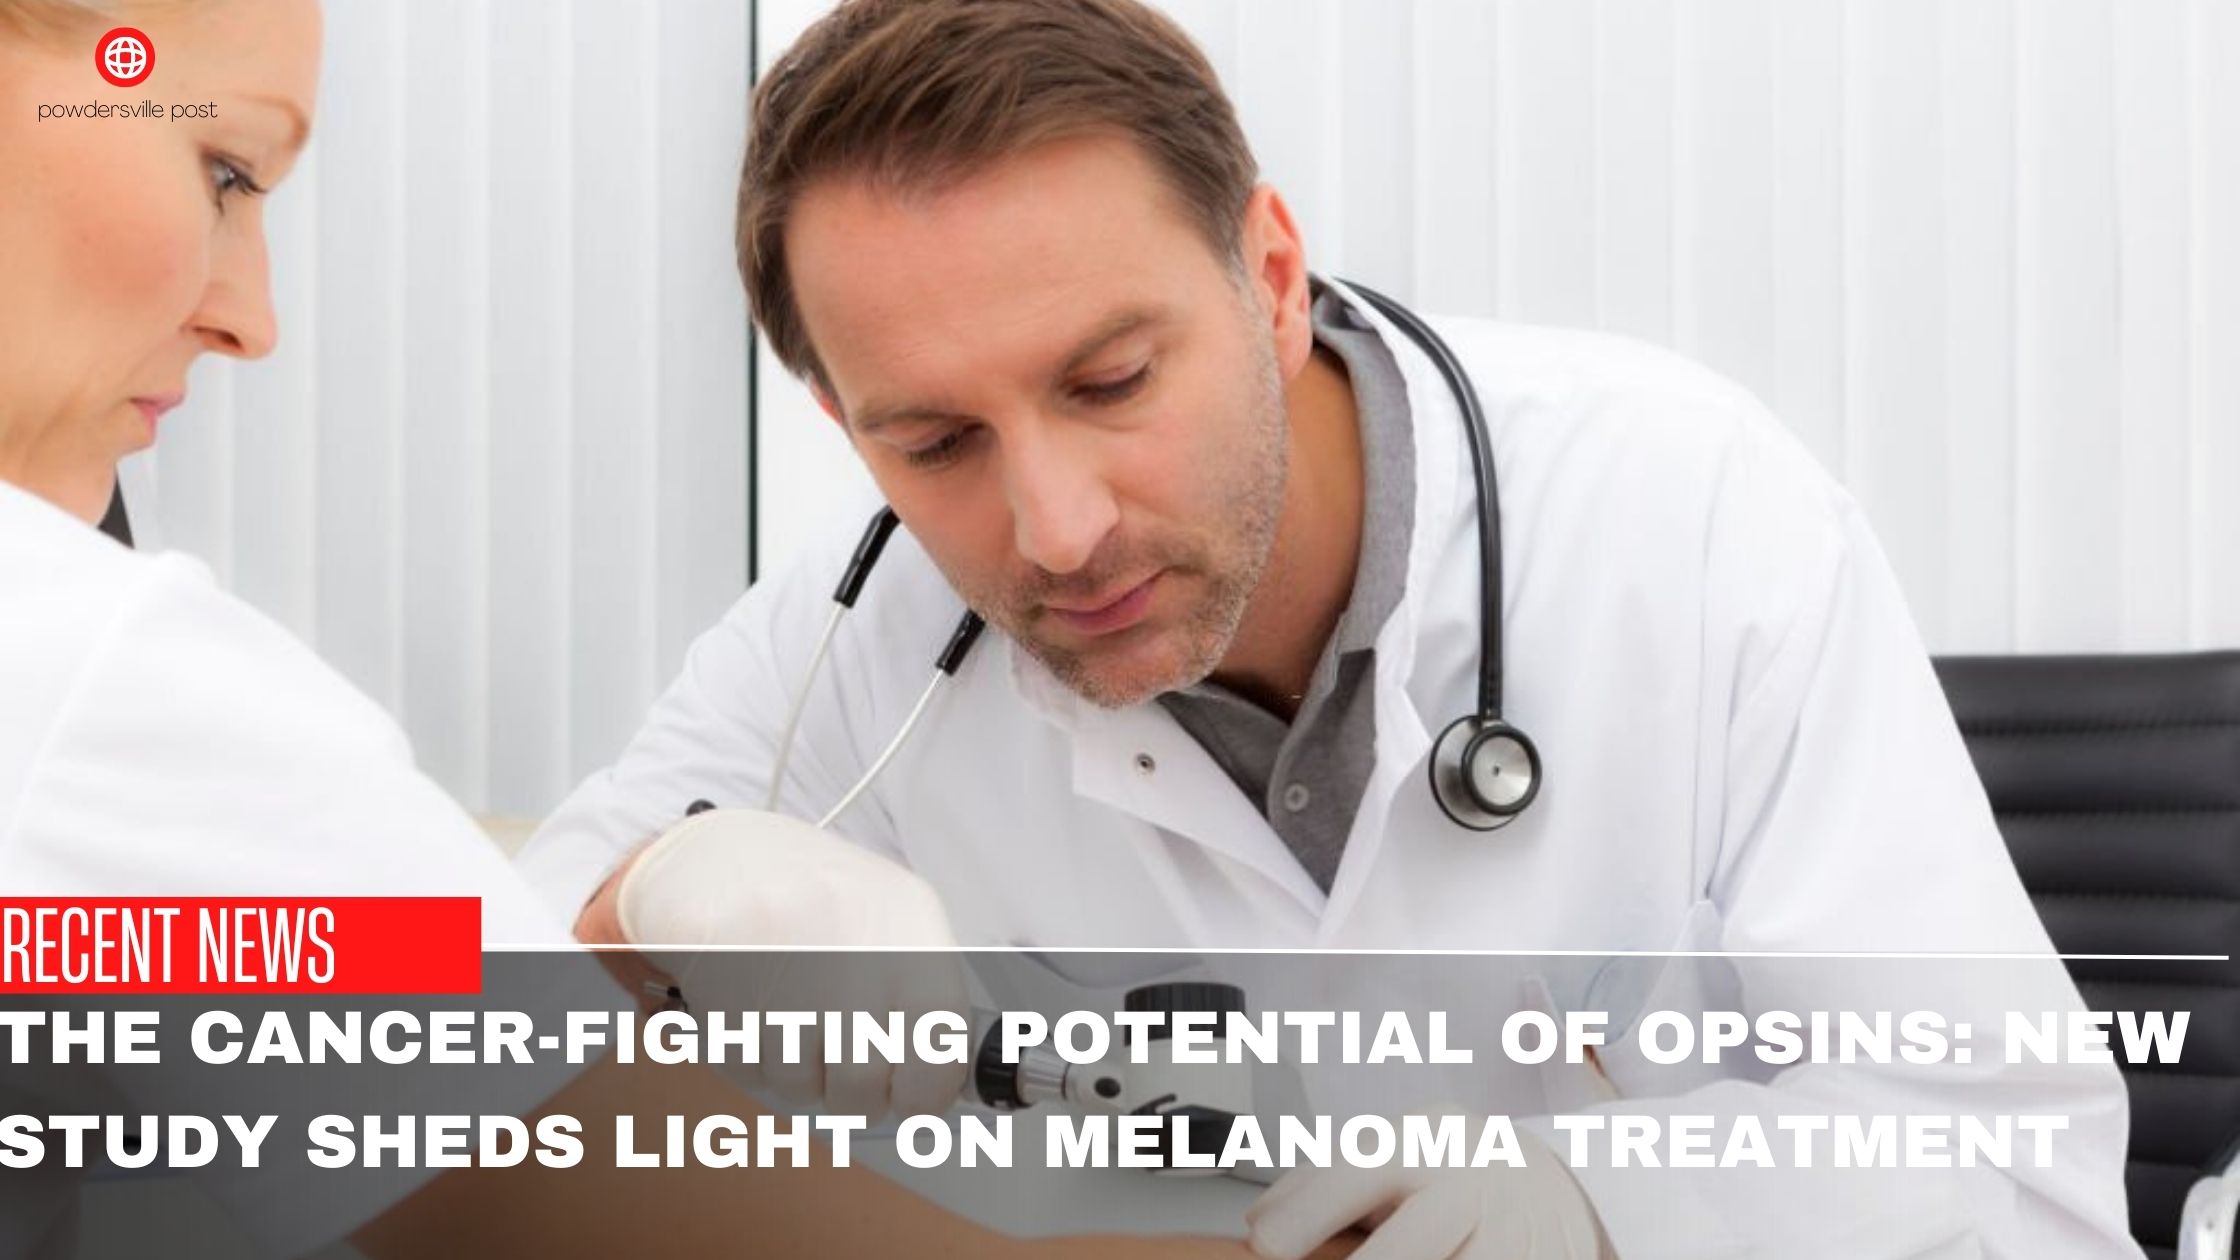 The cancer-fighting potential of opsins new study sheds light on melanoma treatment.